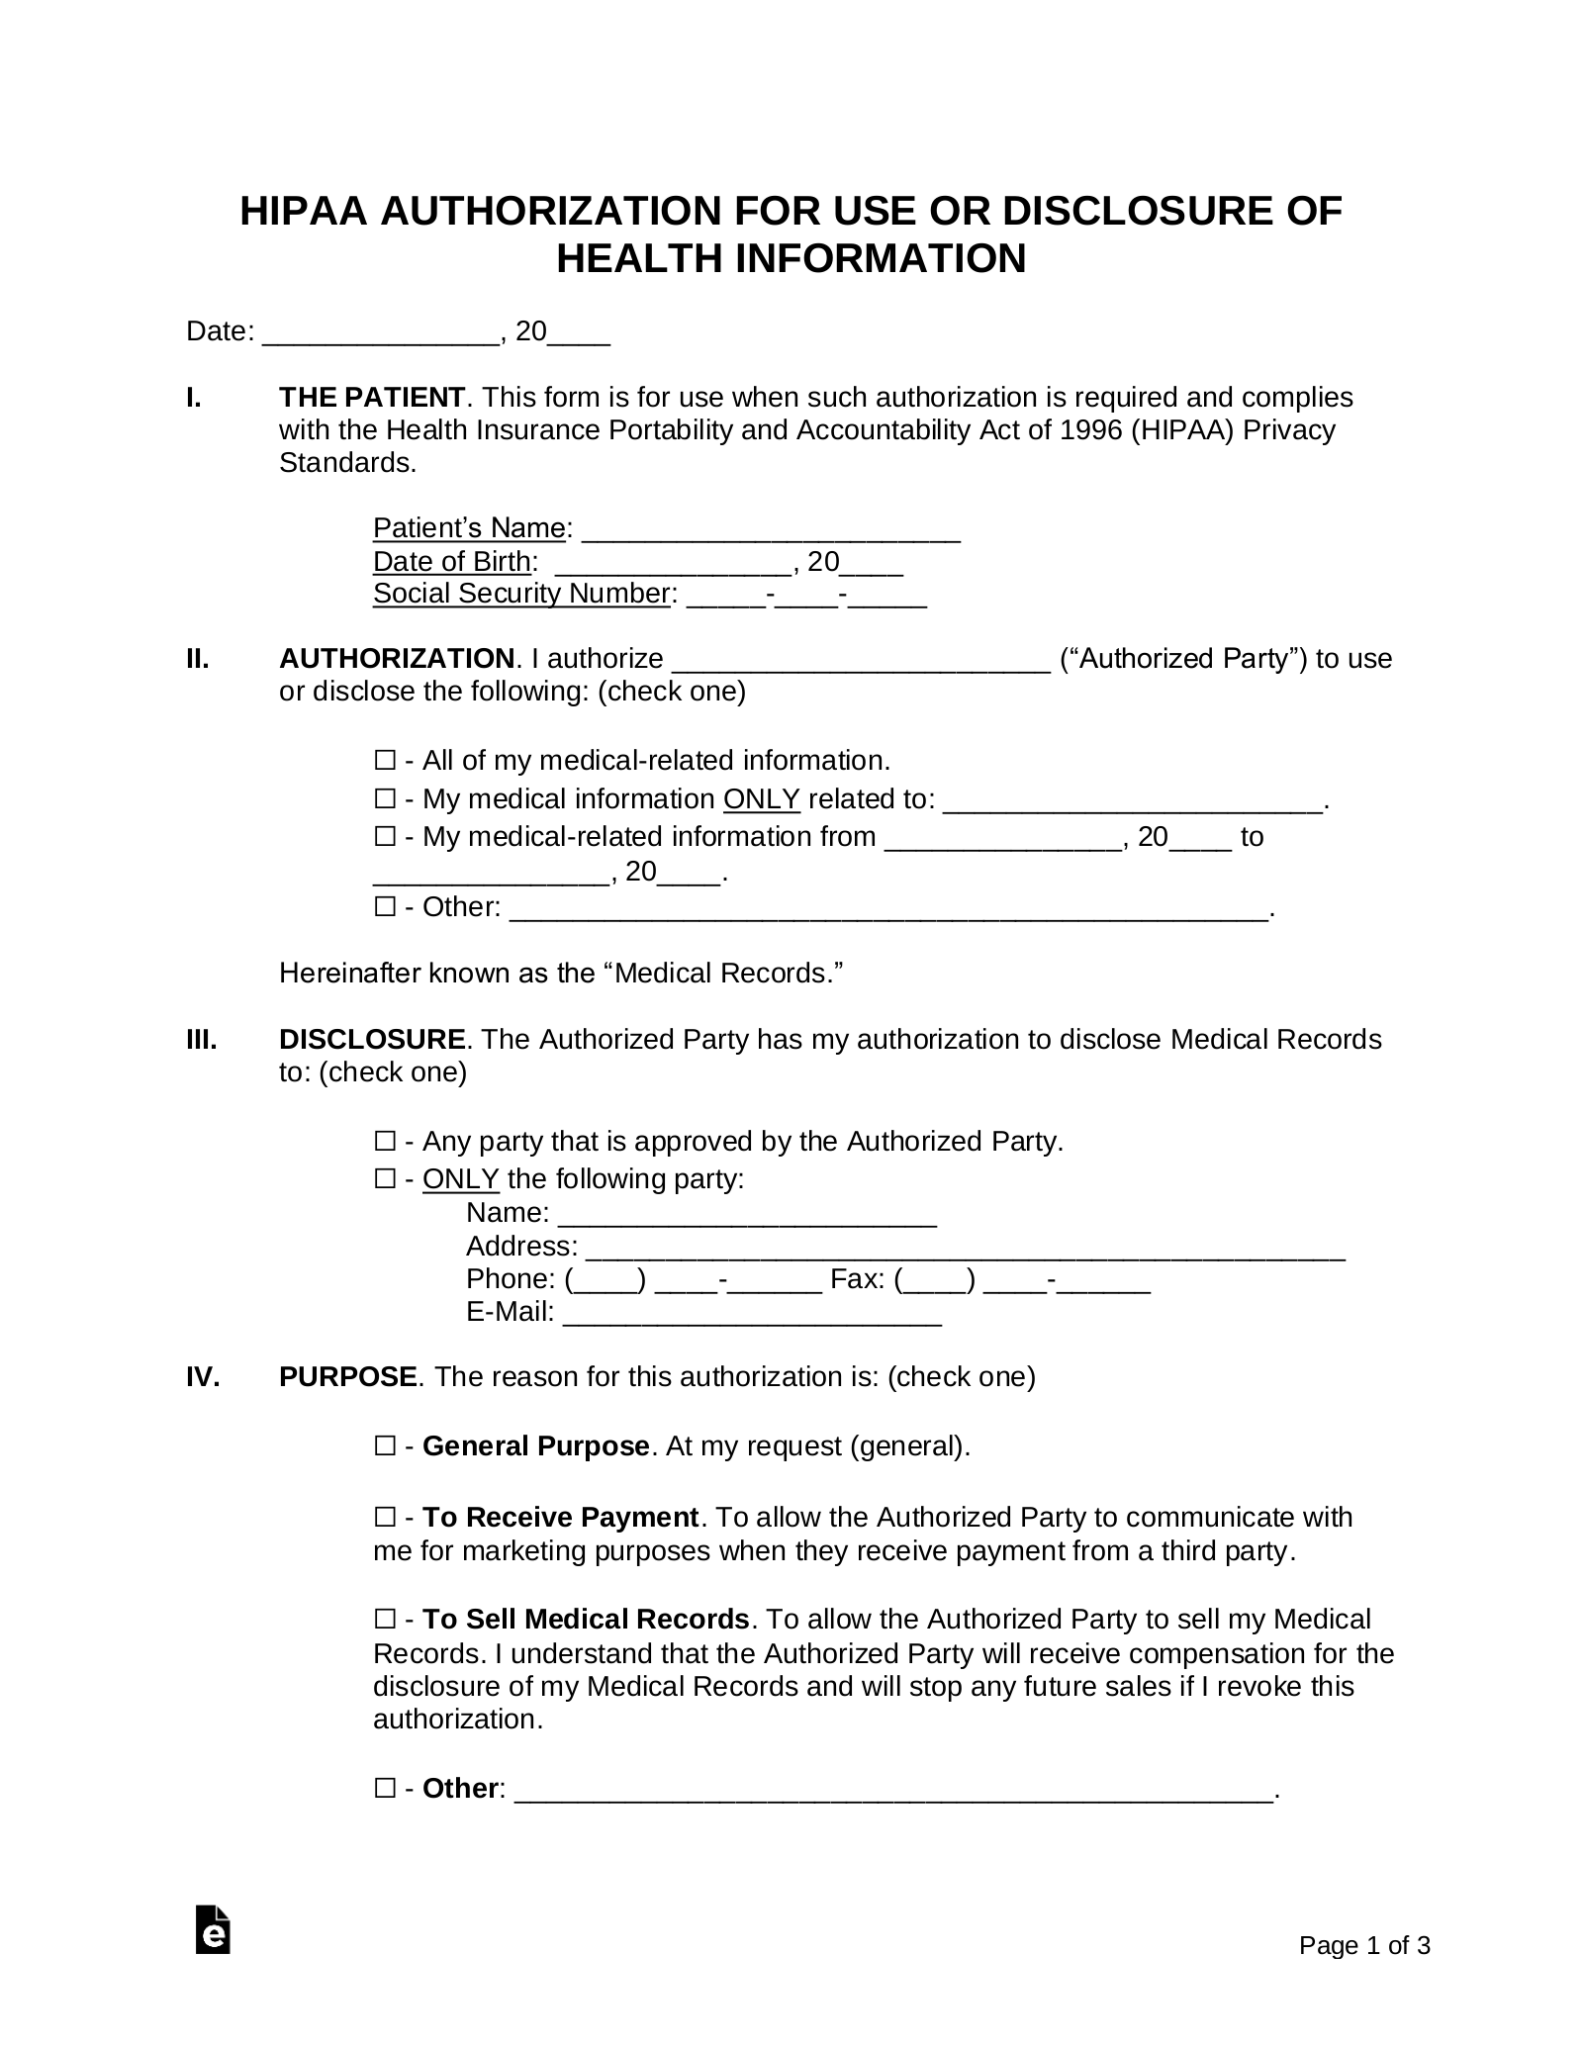 hipaa-authorization-to-release-medical-information-form-in-spanish